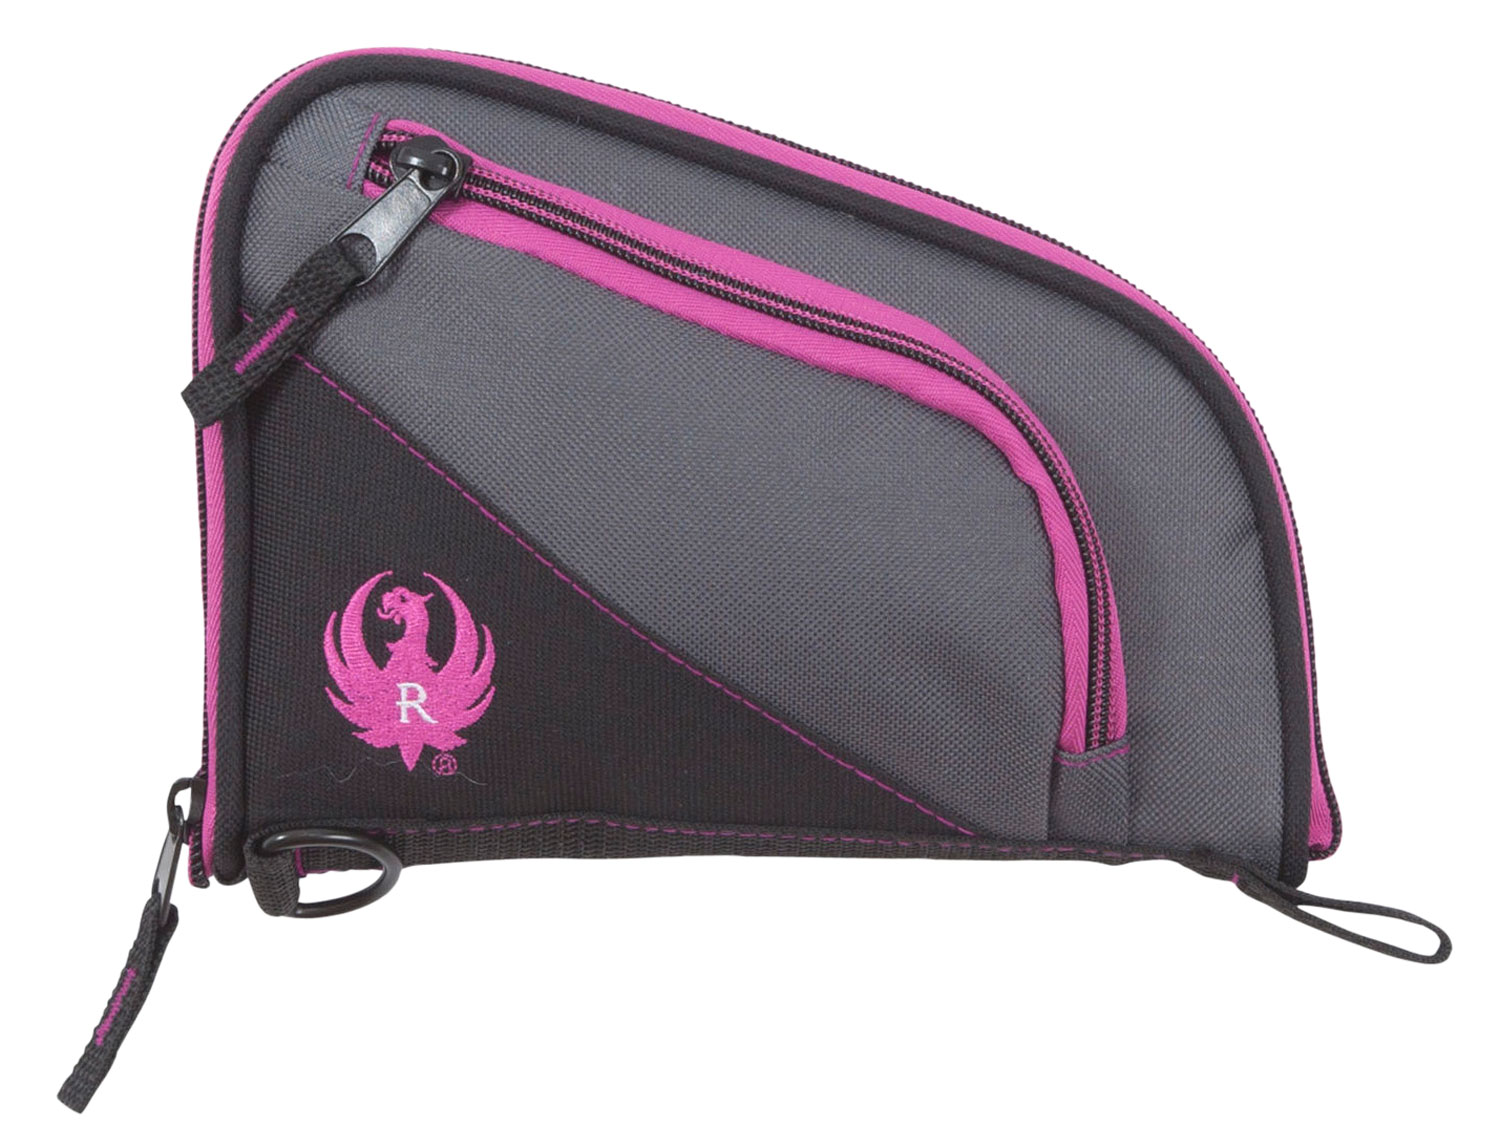 Ruger 27409 Tucson Womens Handgun Case Black/Gray Orchid Accents, Lockable Zippers, 8